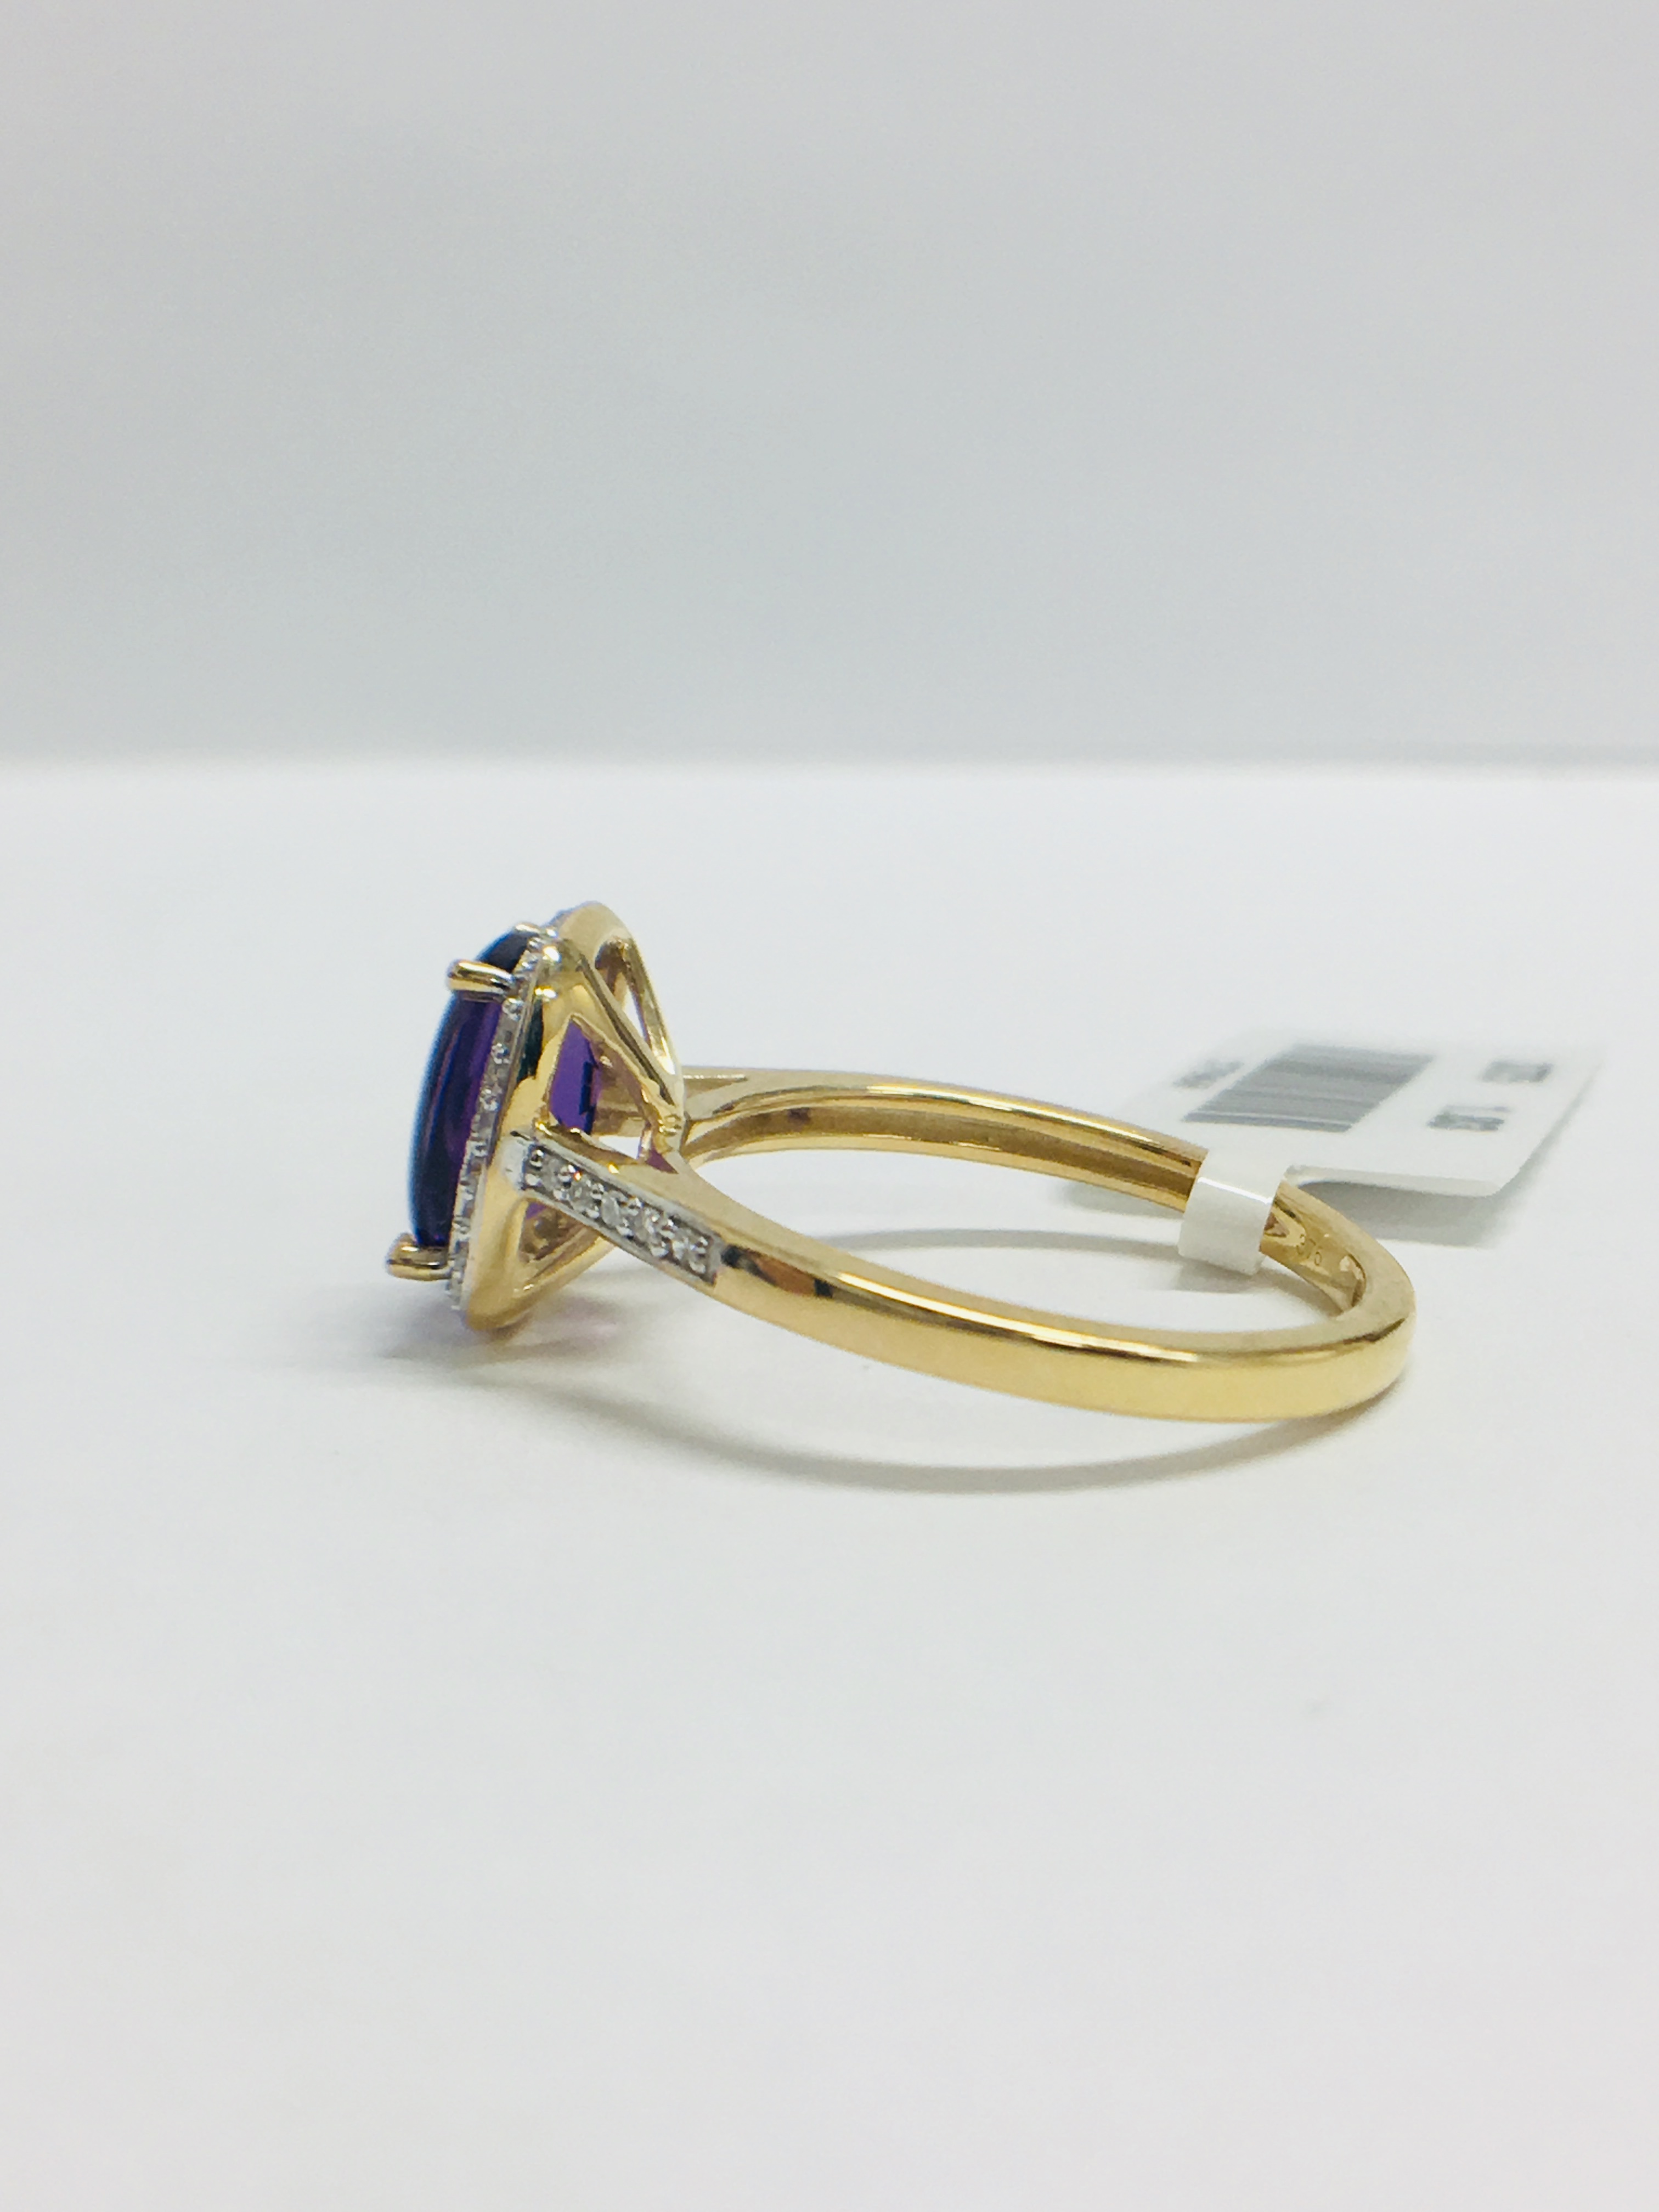 9ct yellow gold Amethyst and diamond ring - Image 4 of 11